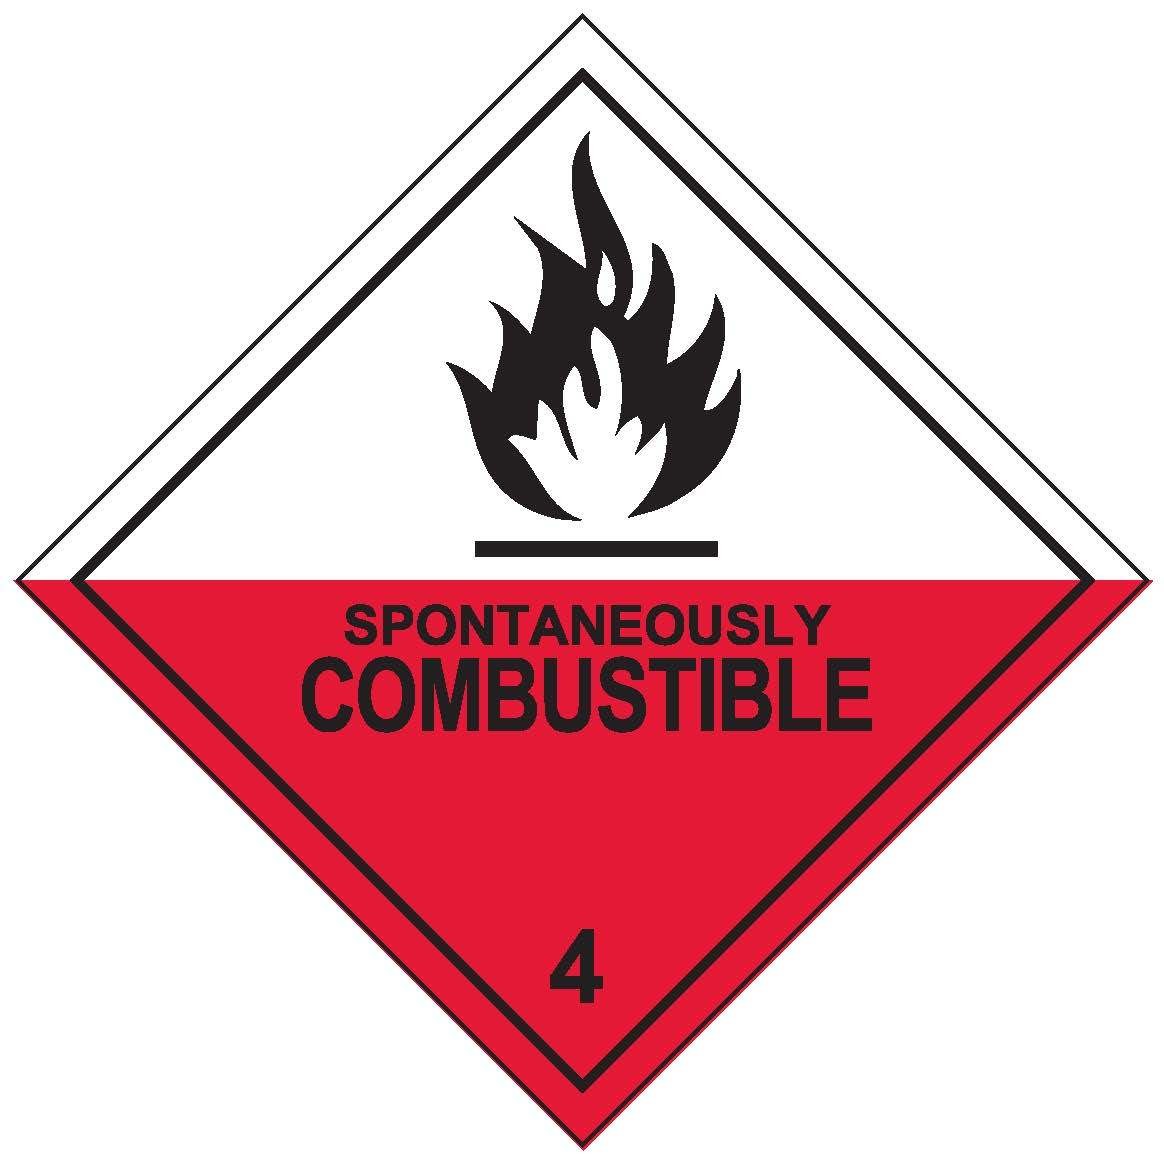 Spontaneously Combustible Class 4